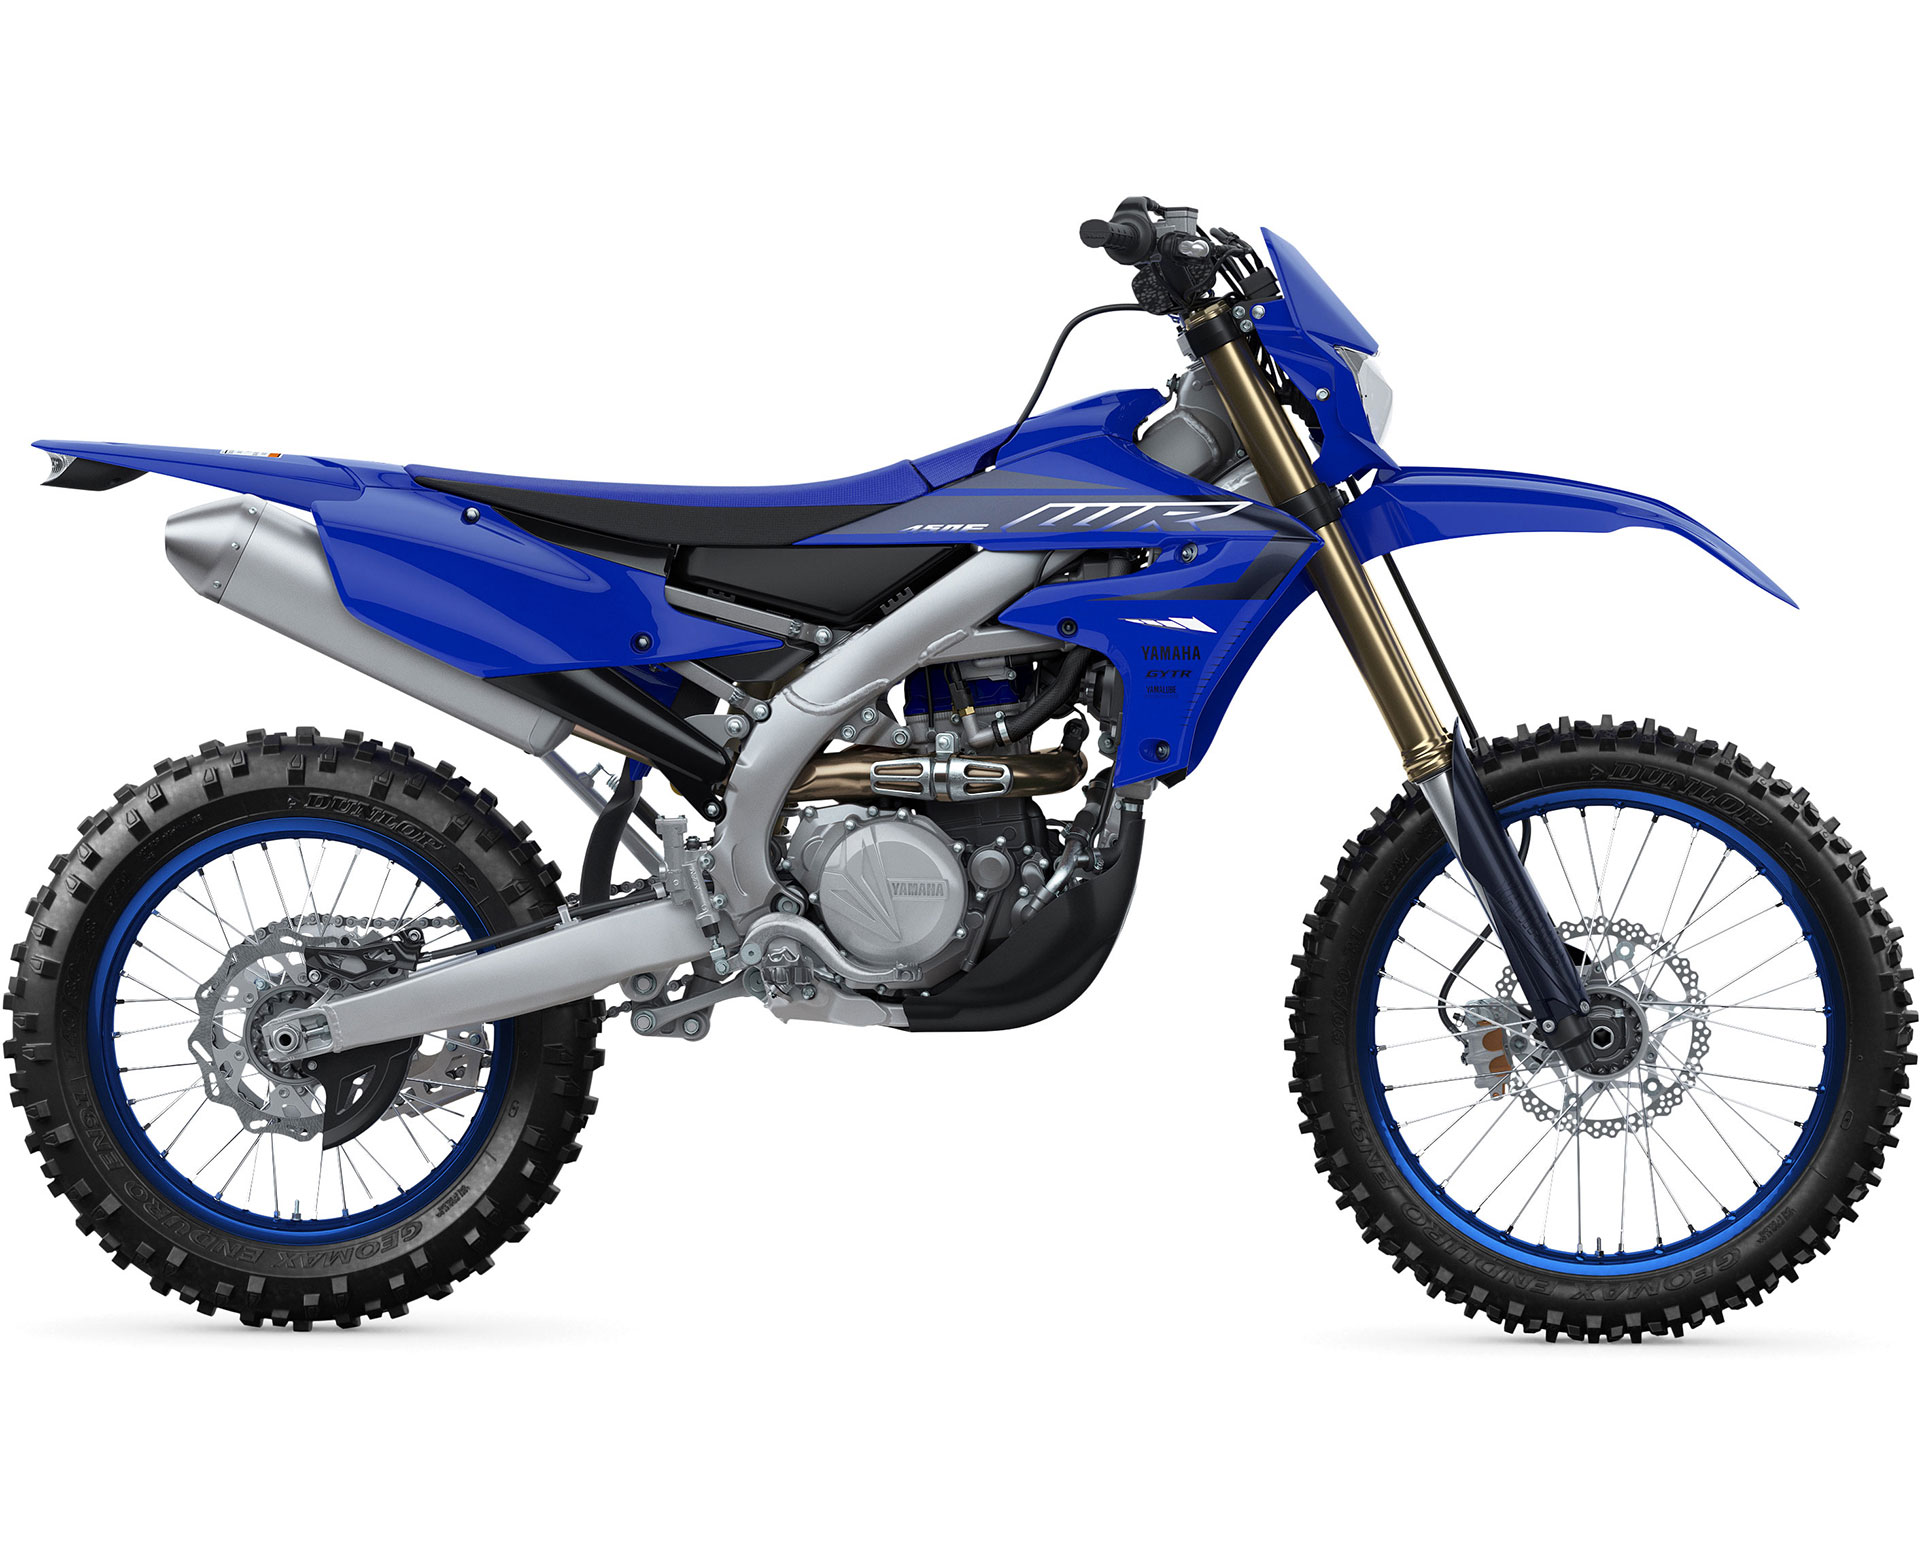 Thumbnail of your customized 2023 WR450F